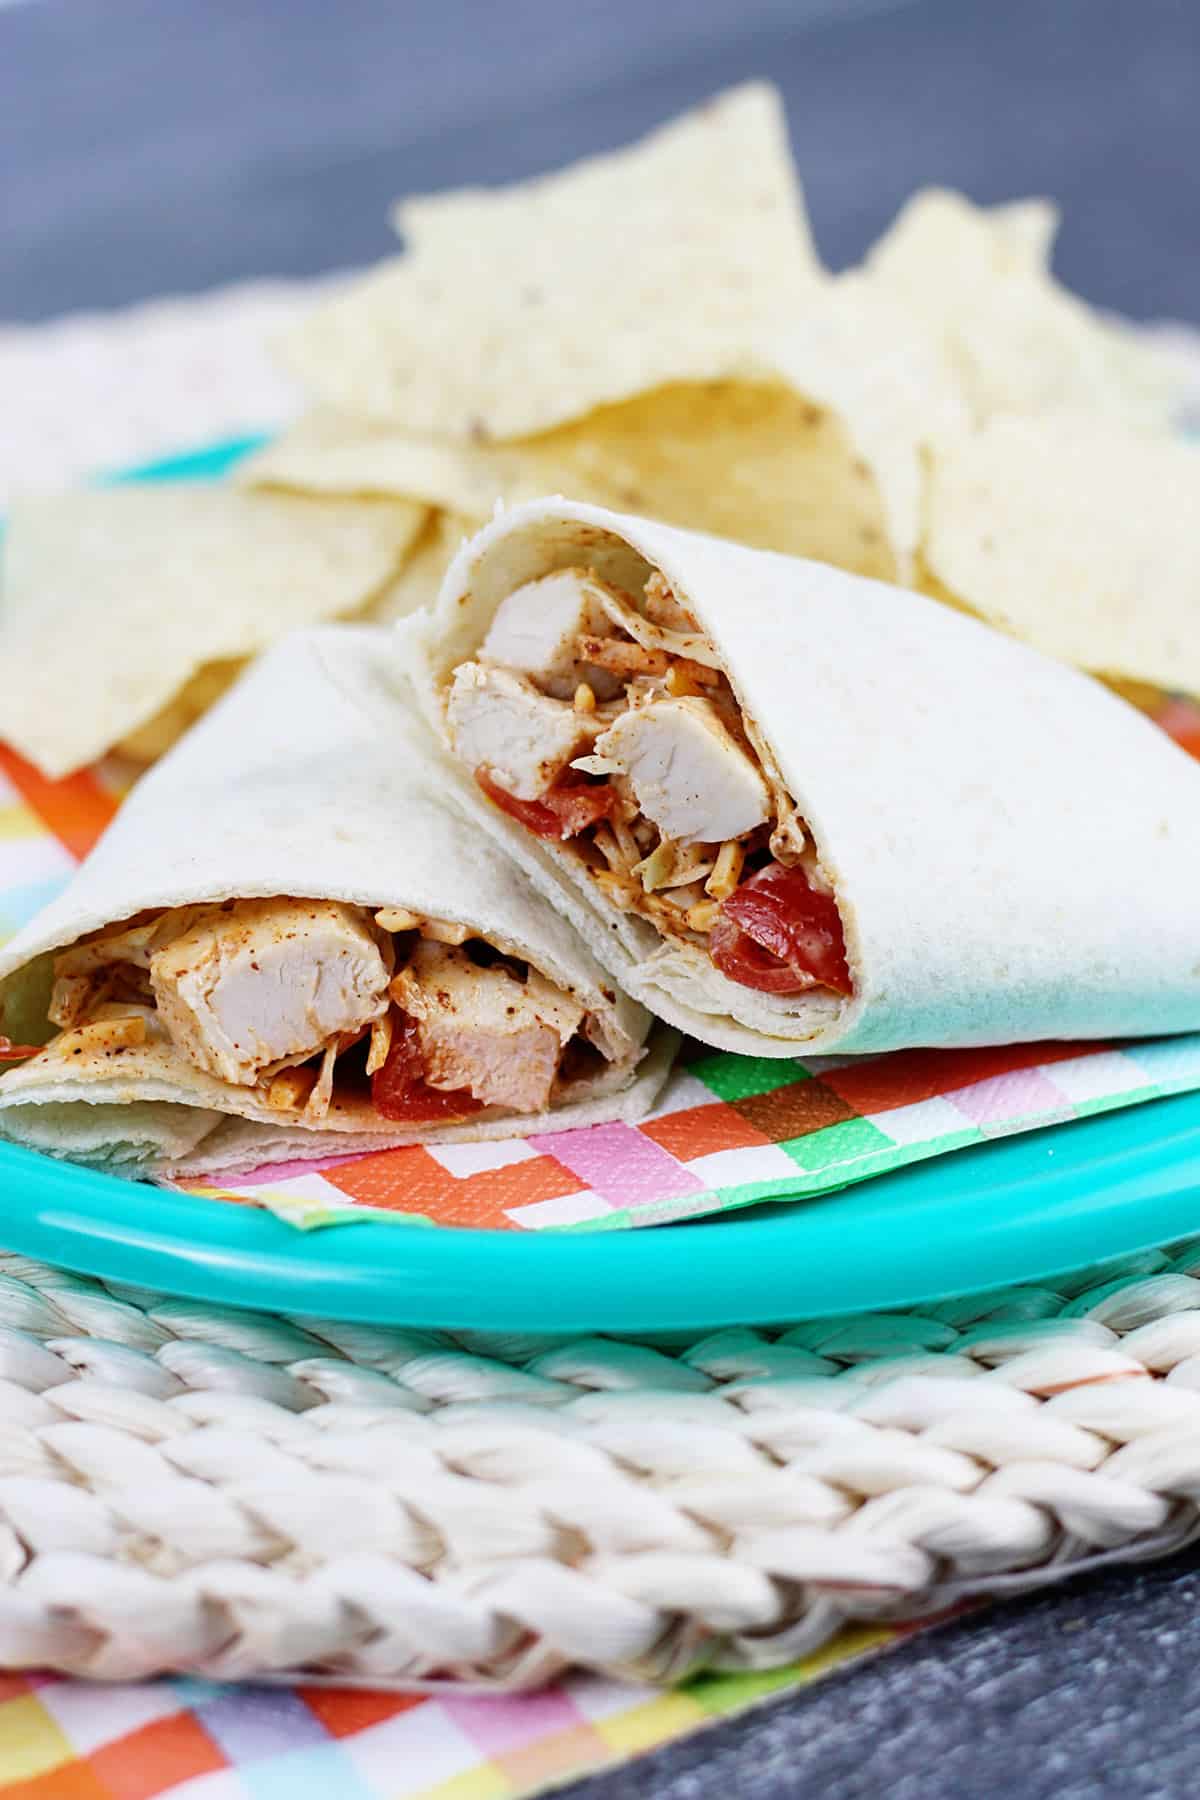 A Southwest chicken wrap sliced in half on a blue plate.